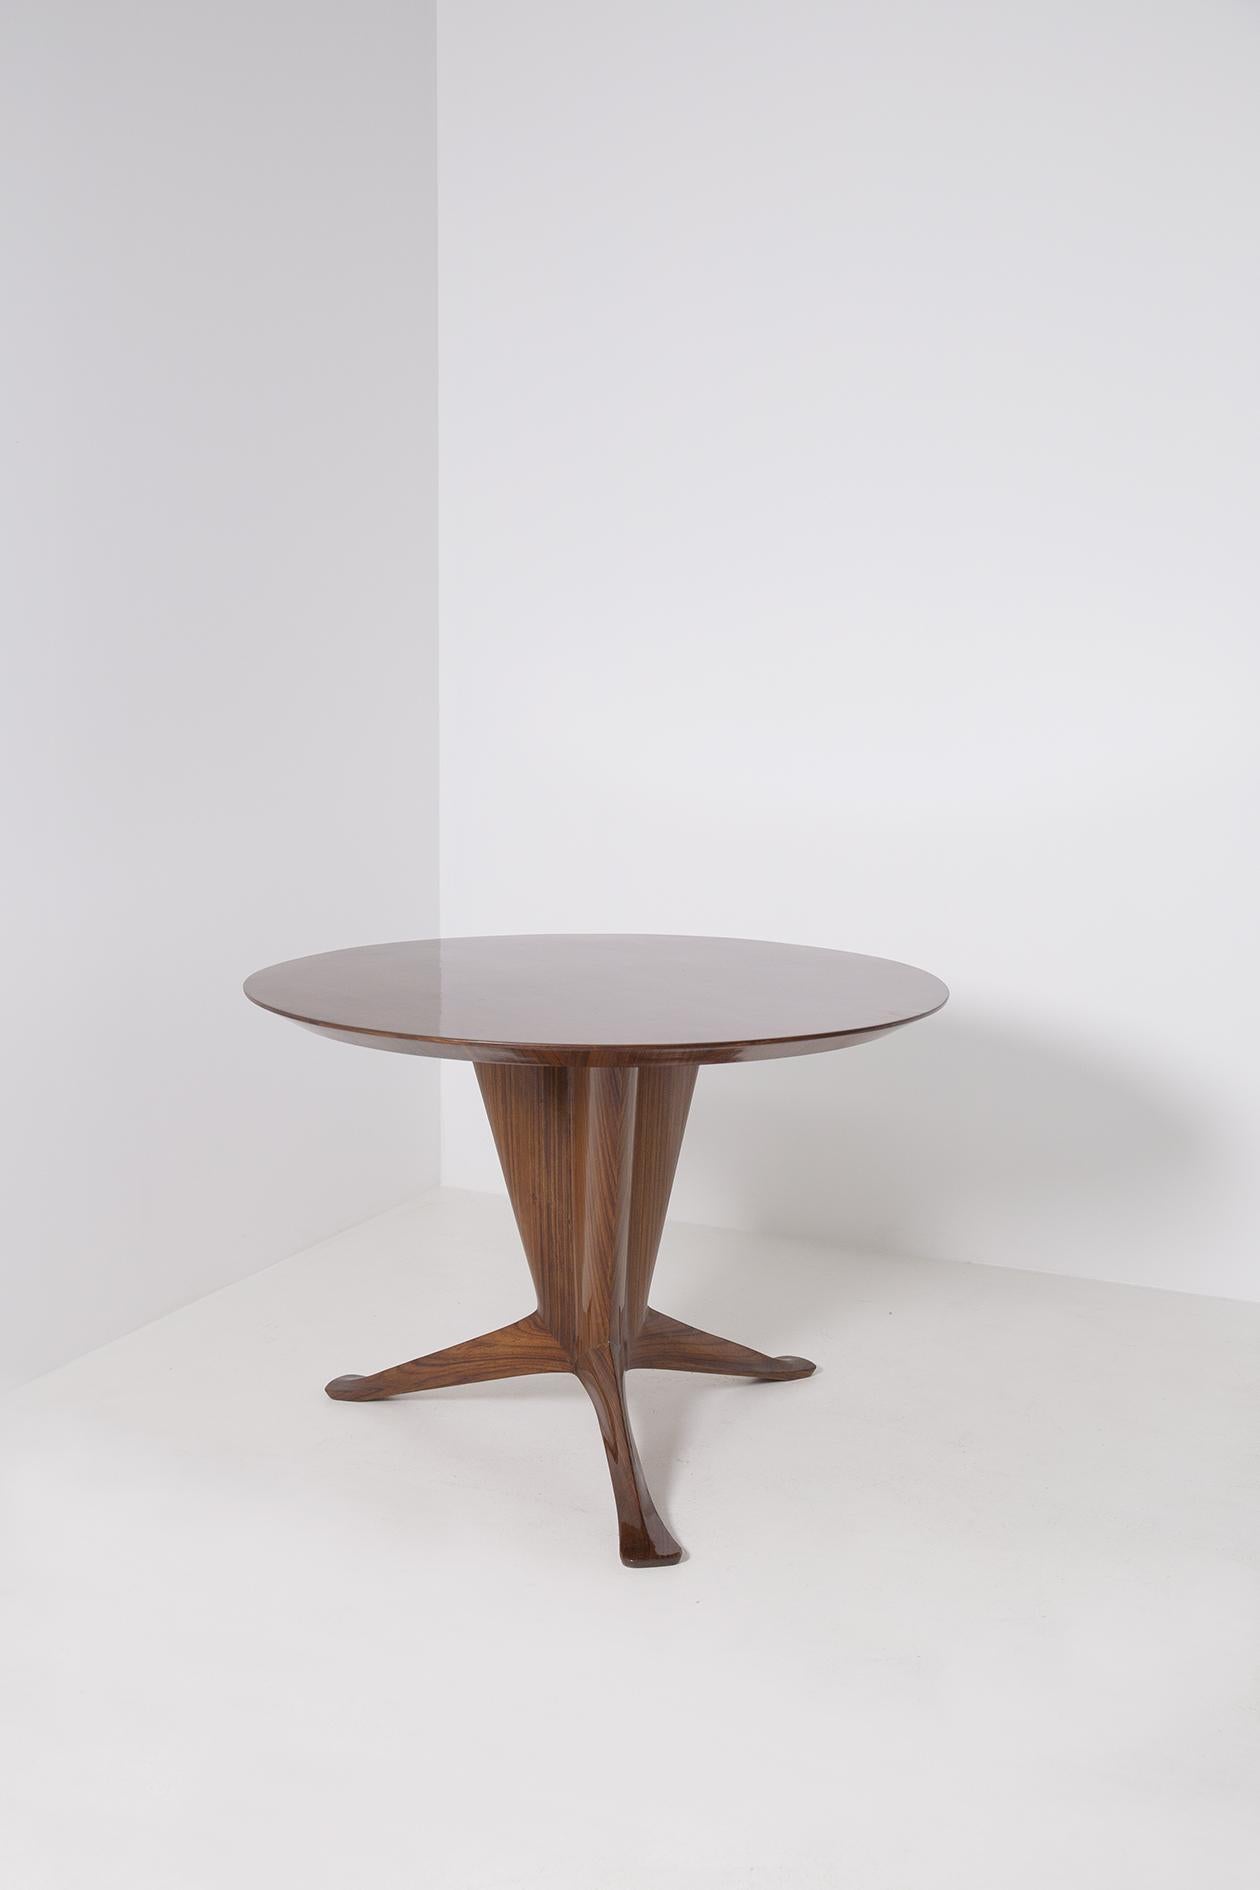 Important Italian table designed by the great designer Ico Parisi, from 1949. The table was designed by Ico Parisi and executed by Fratelli Rizzi Intimiano - Italy, for a private home. The dining table is a single piece that exists and has been